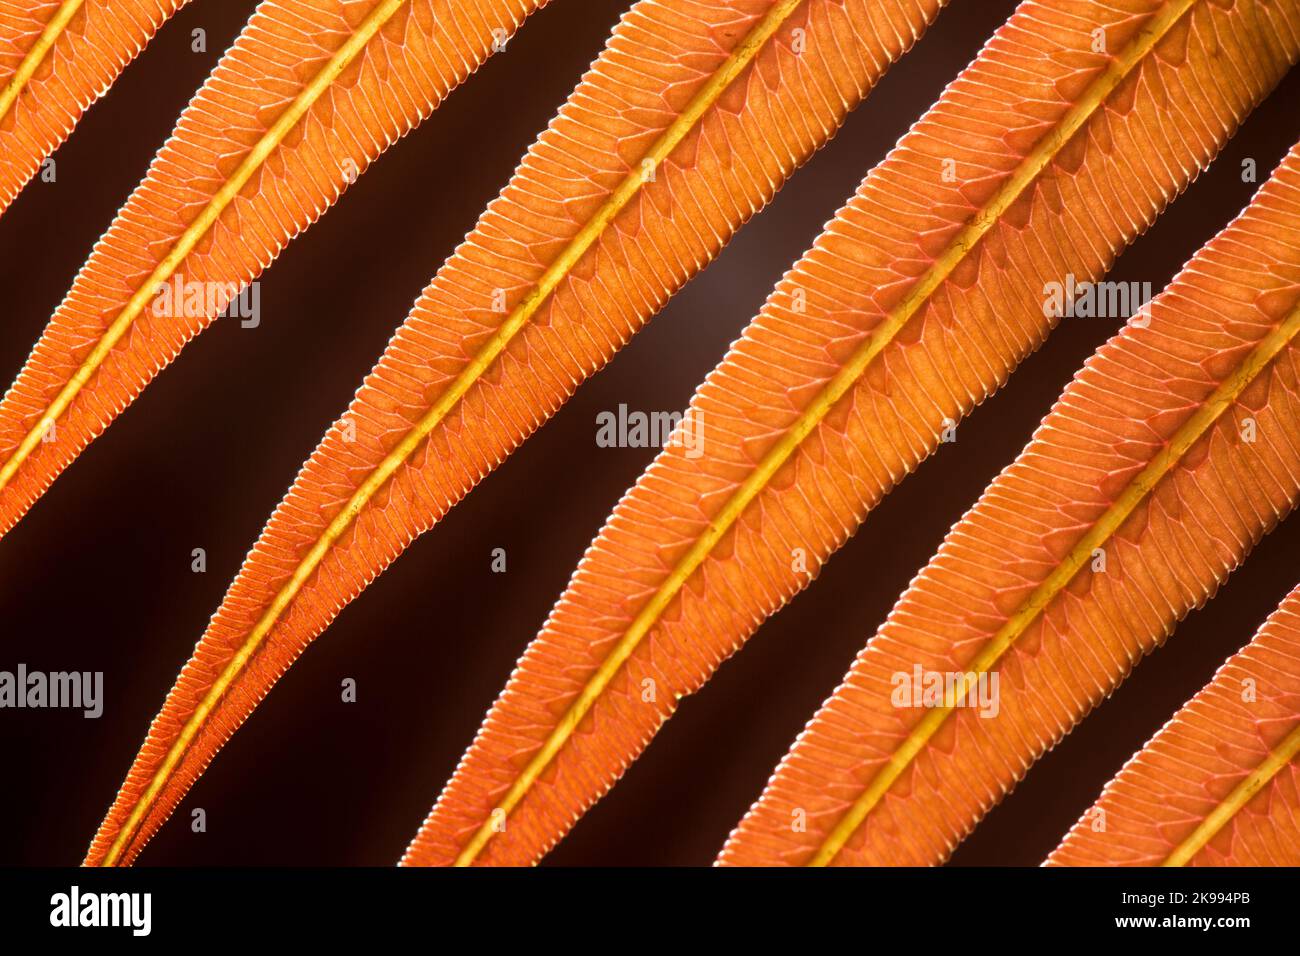 Close-up underside of a young orange fern leaf show venation textures within the leaf against black blurred in the background. Stock Photo